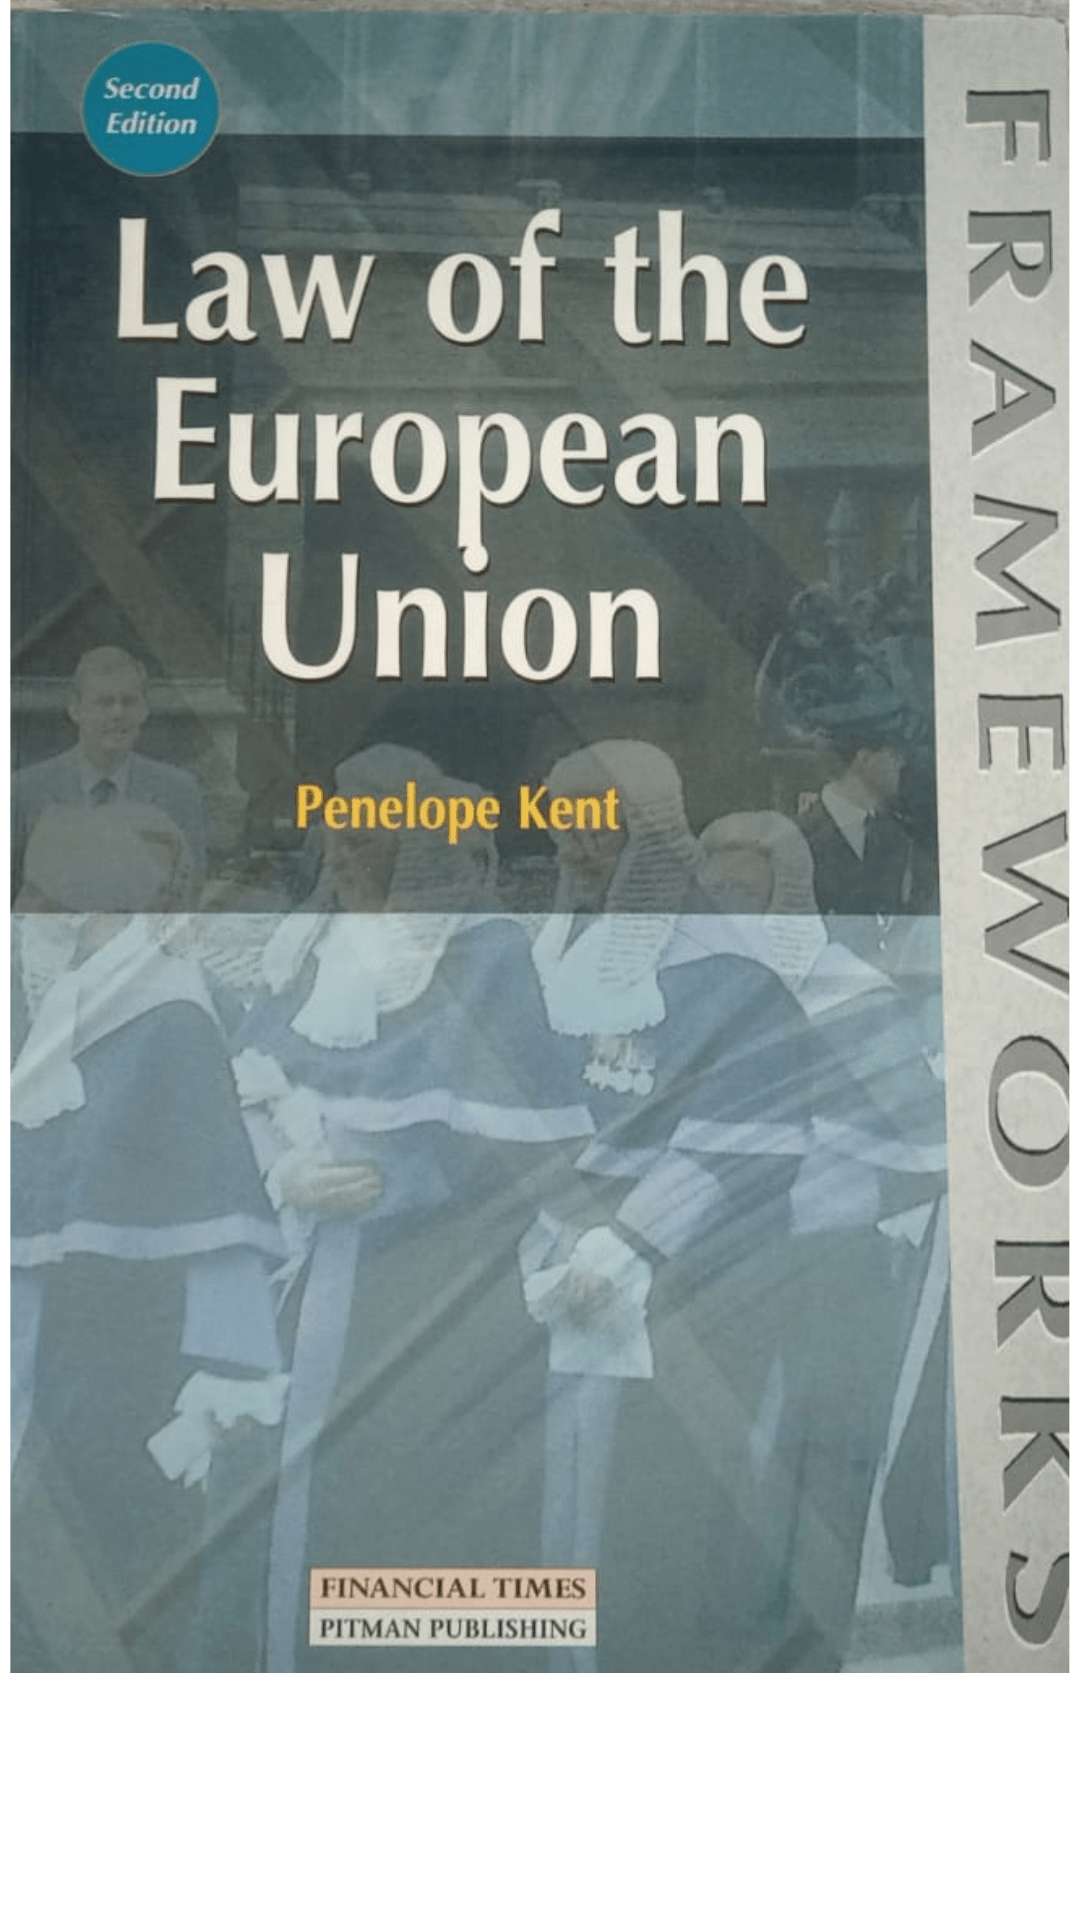 Law of The European Union by Penelope Kent